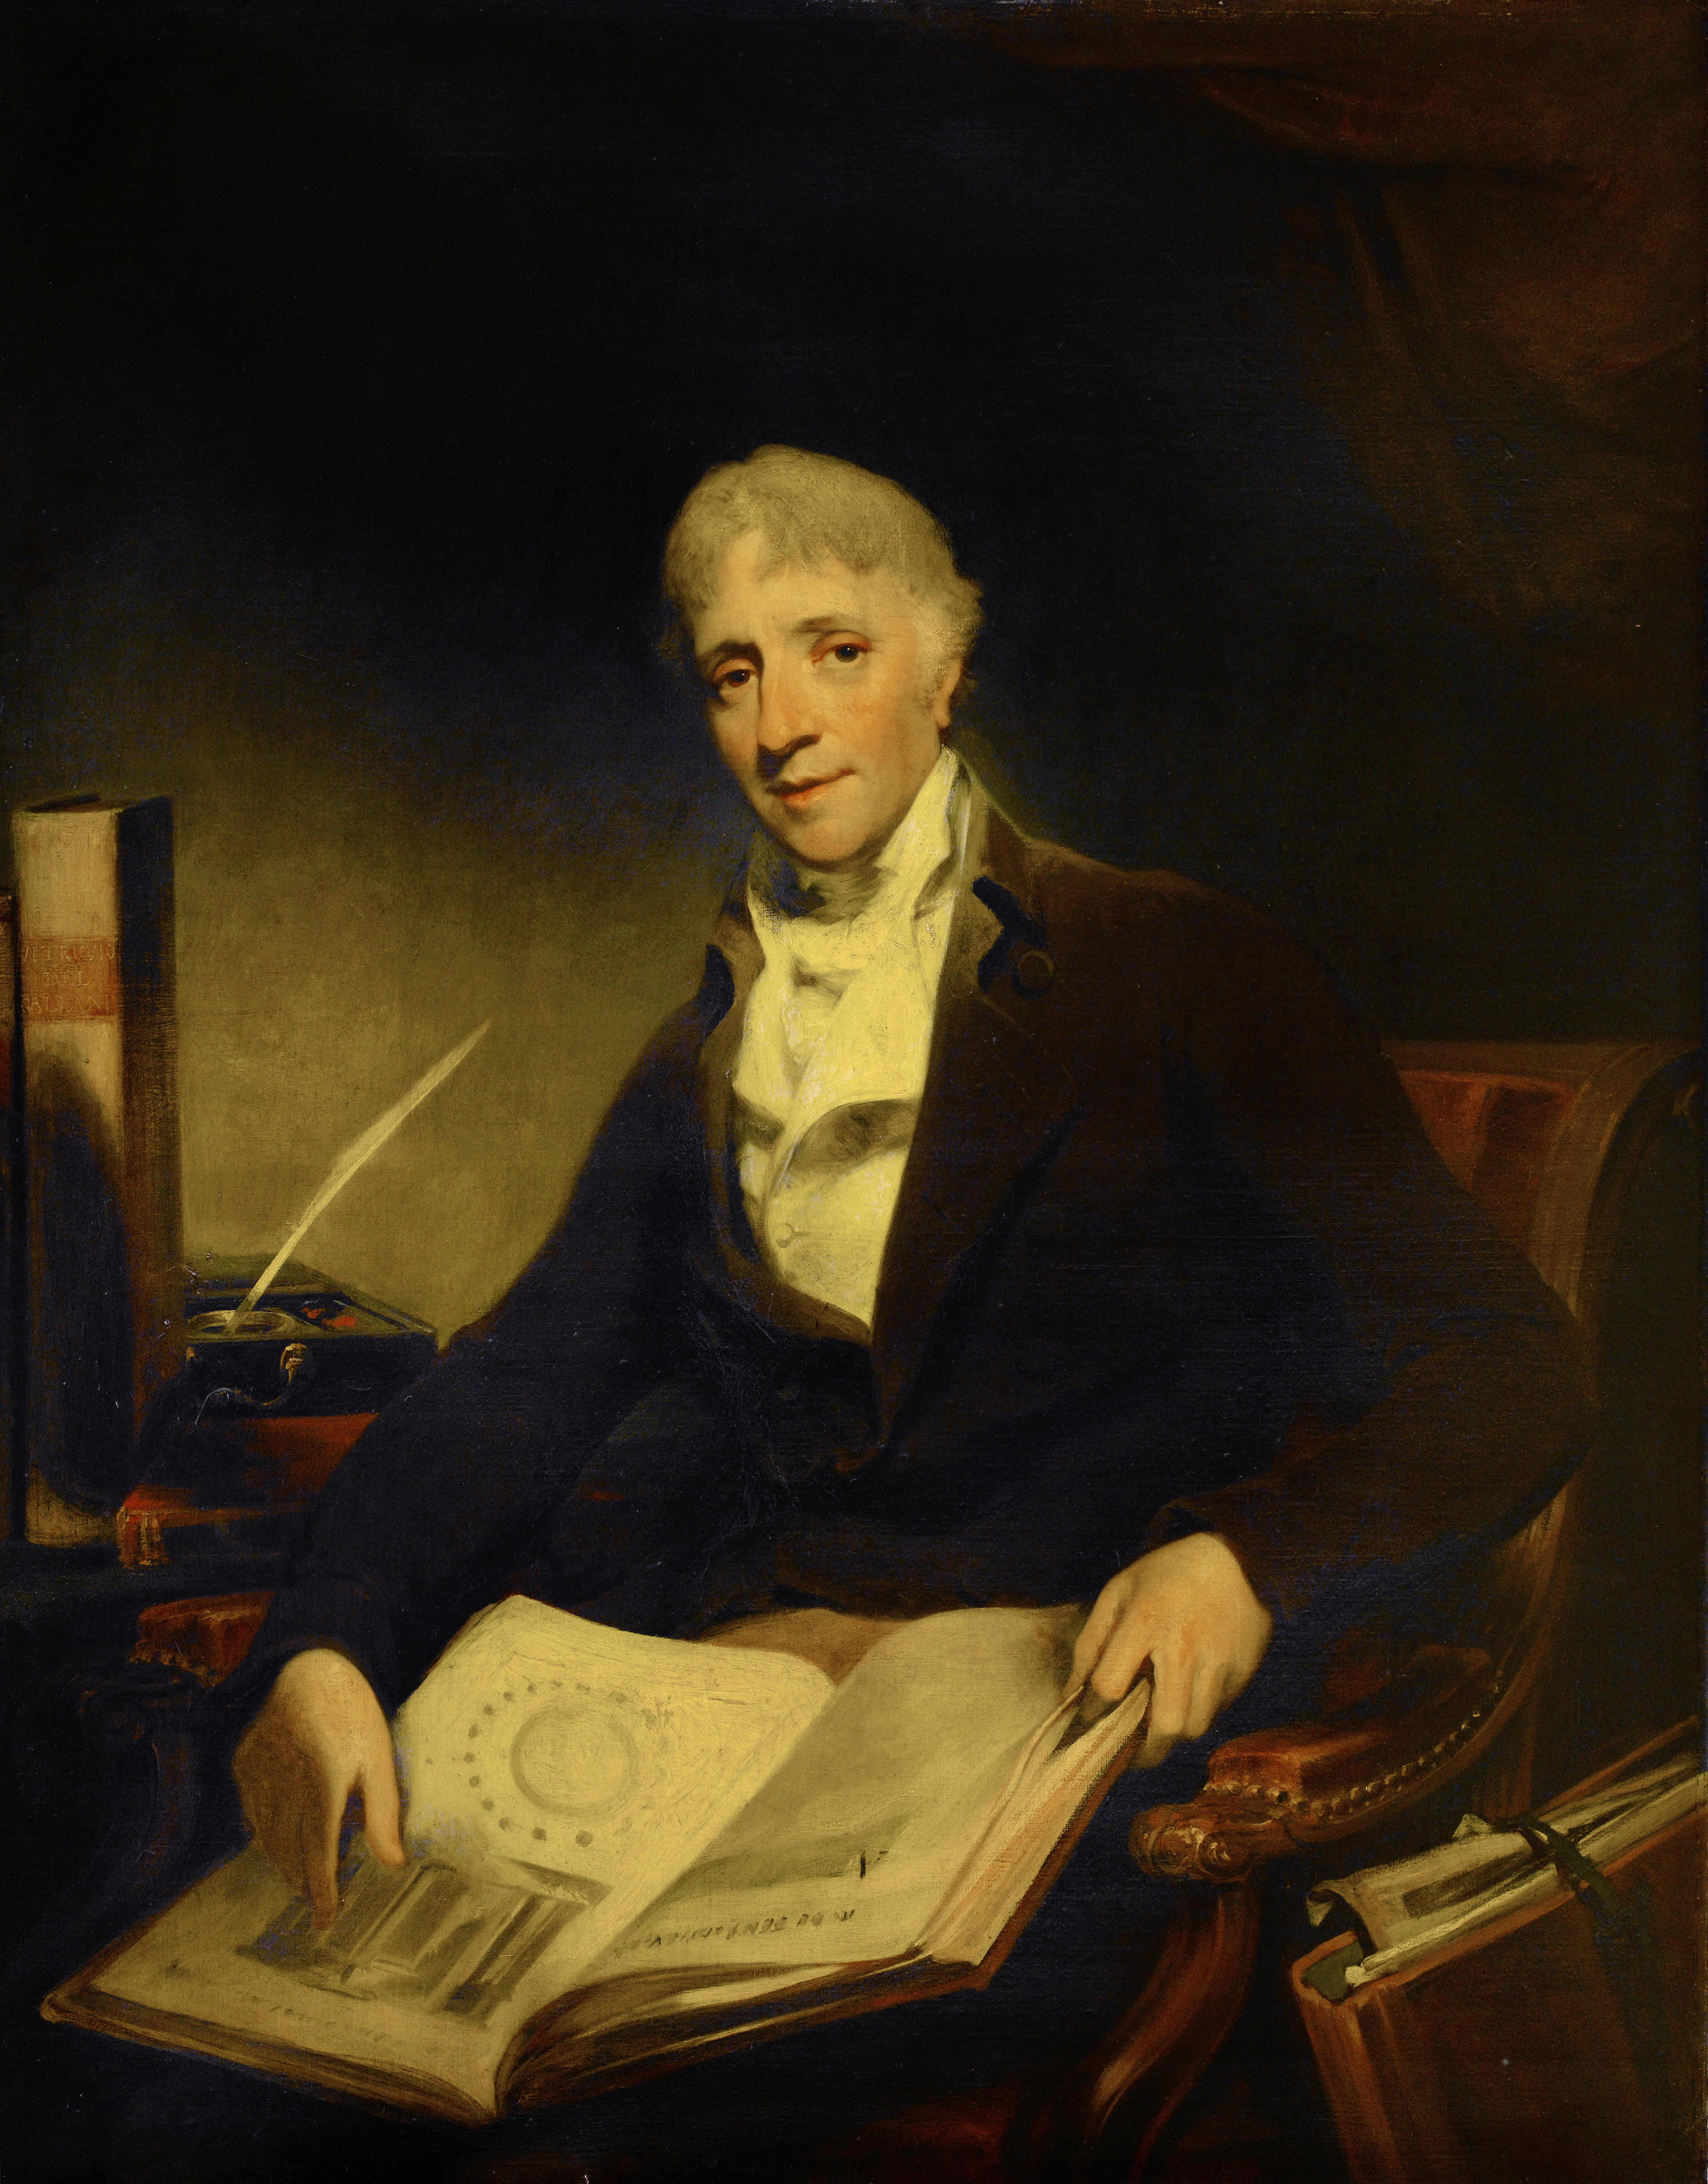 early nineteenth century oil painting of a grey-haired man in a white cravat and dark jacket seated on a chair with an open book about architecture on his lap, further volumes either side and a quill and ink well